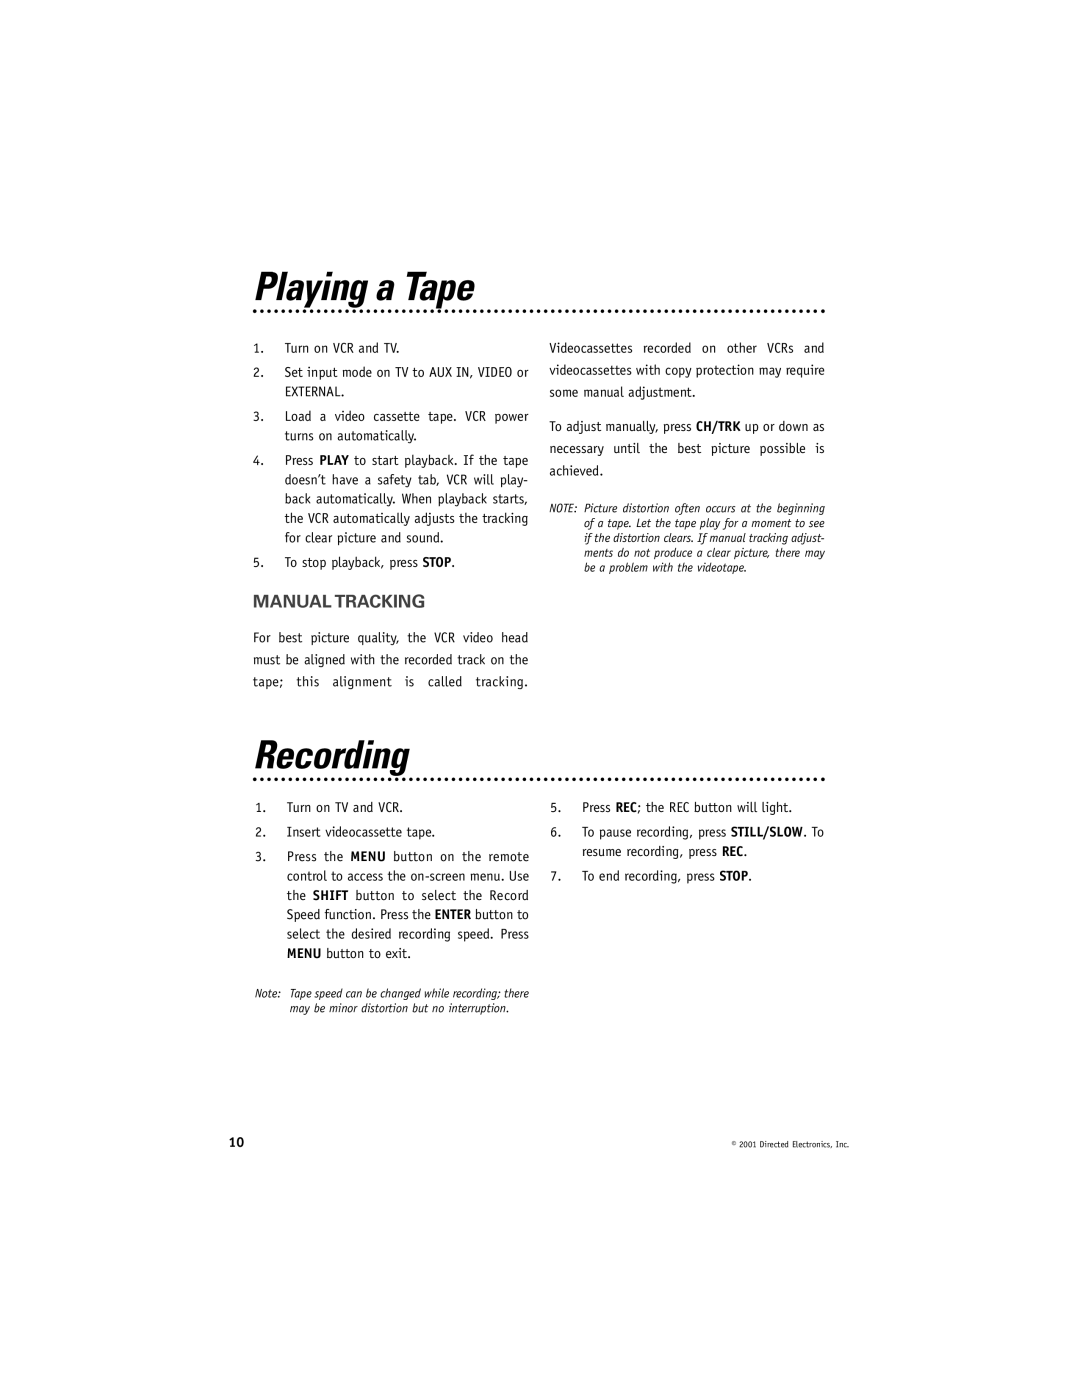 Directed Electronics VC2010 manual Playing a Tape, Recording, Manual Tracking 